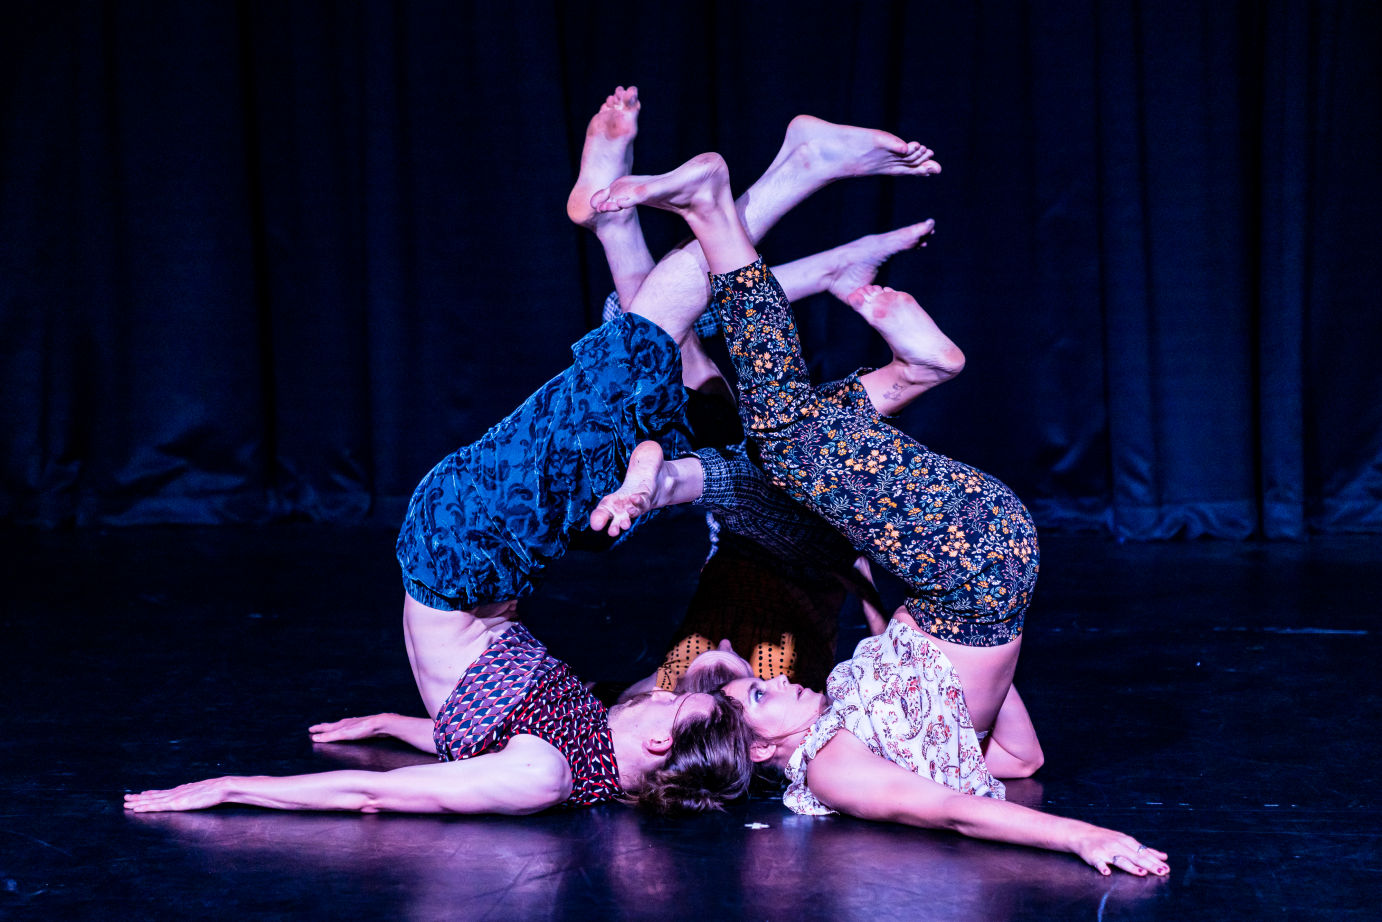 In a clump, three people do shoulder stands on the floor. Their feet entwine.